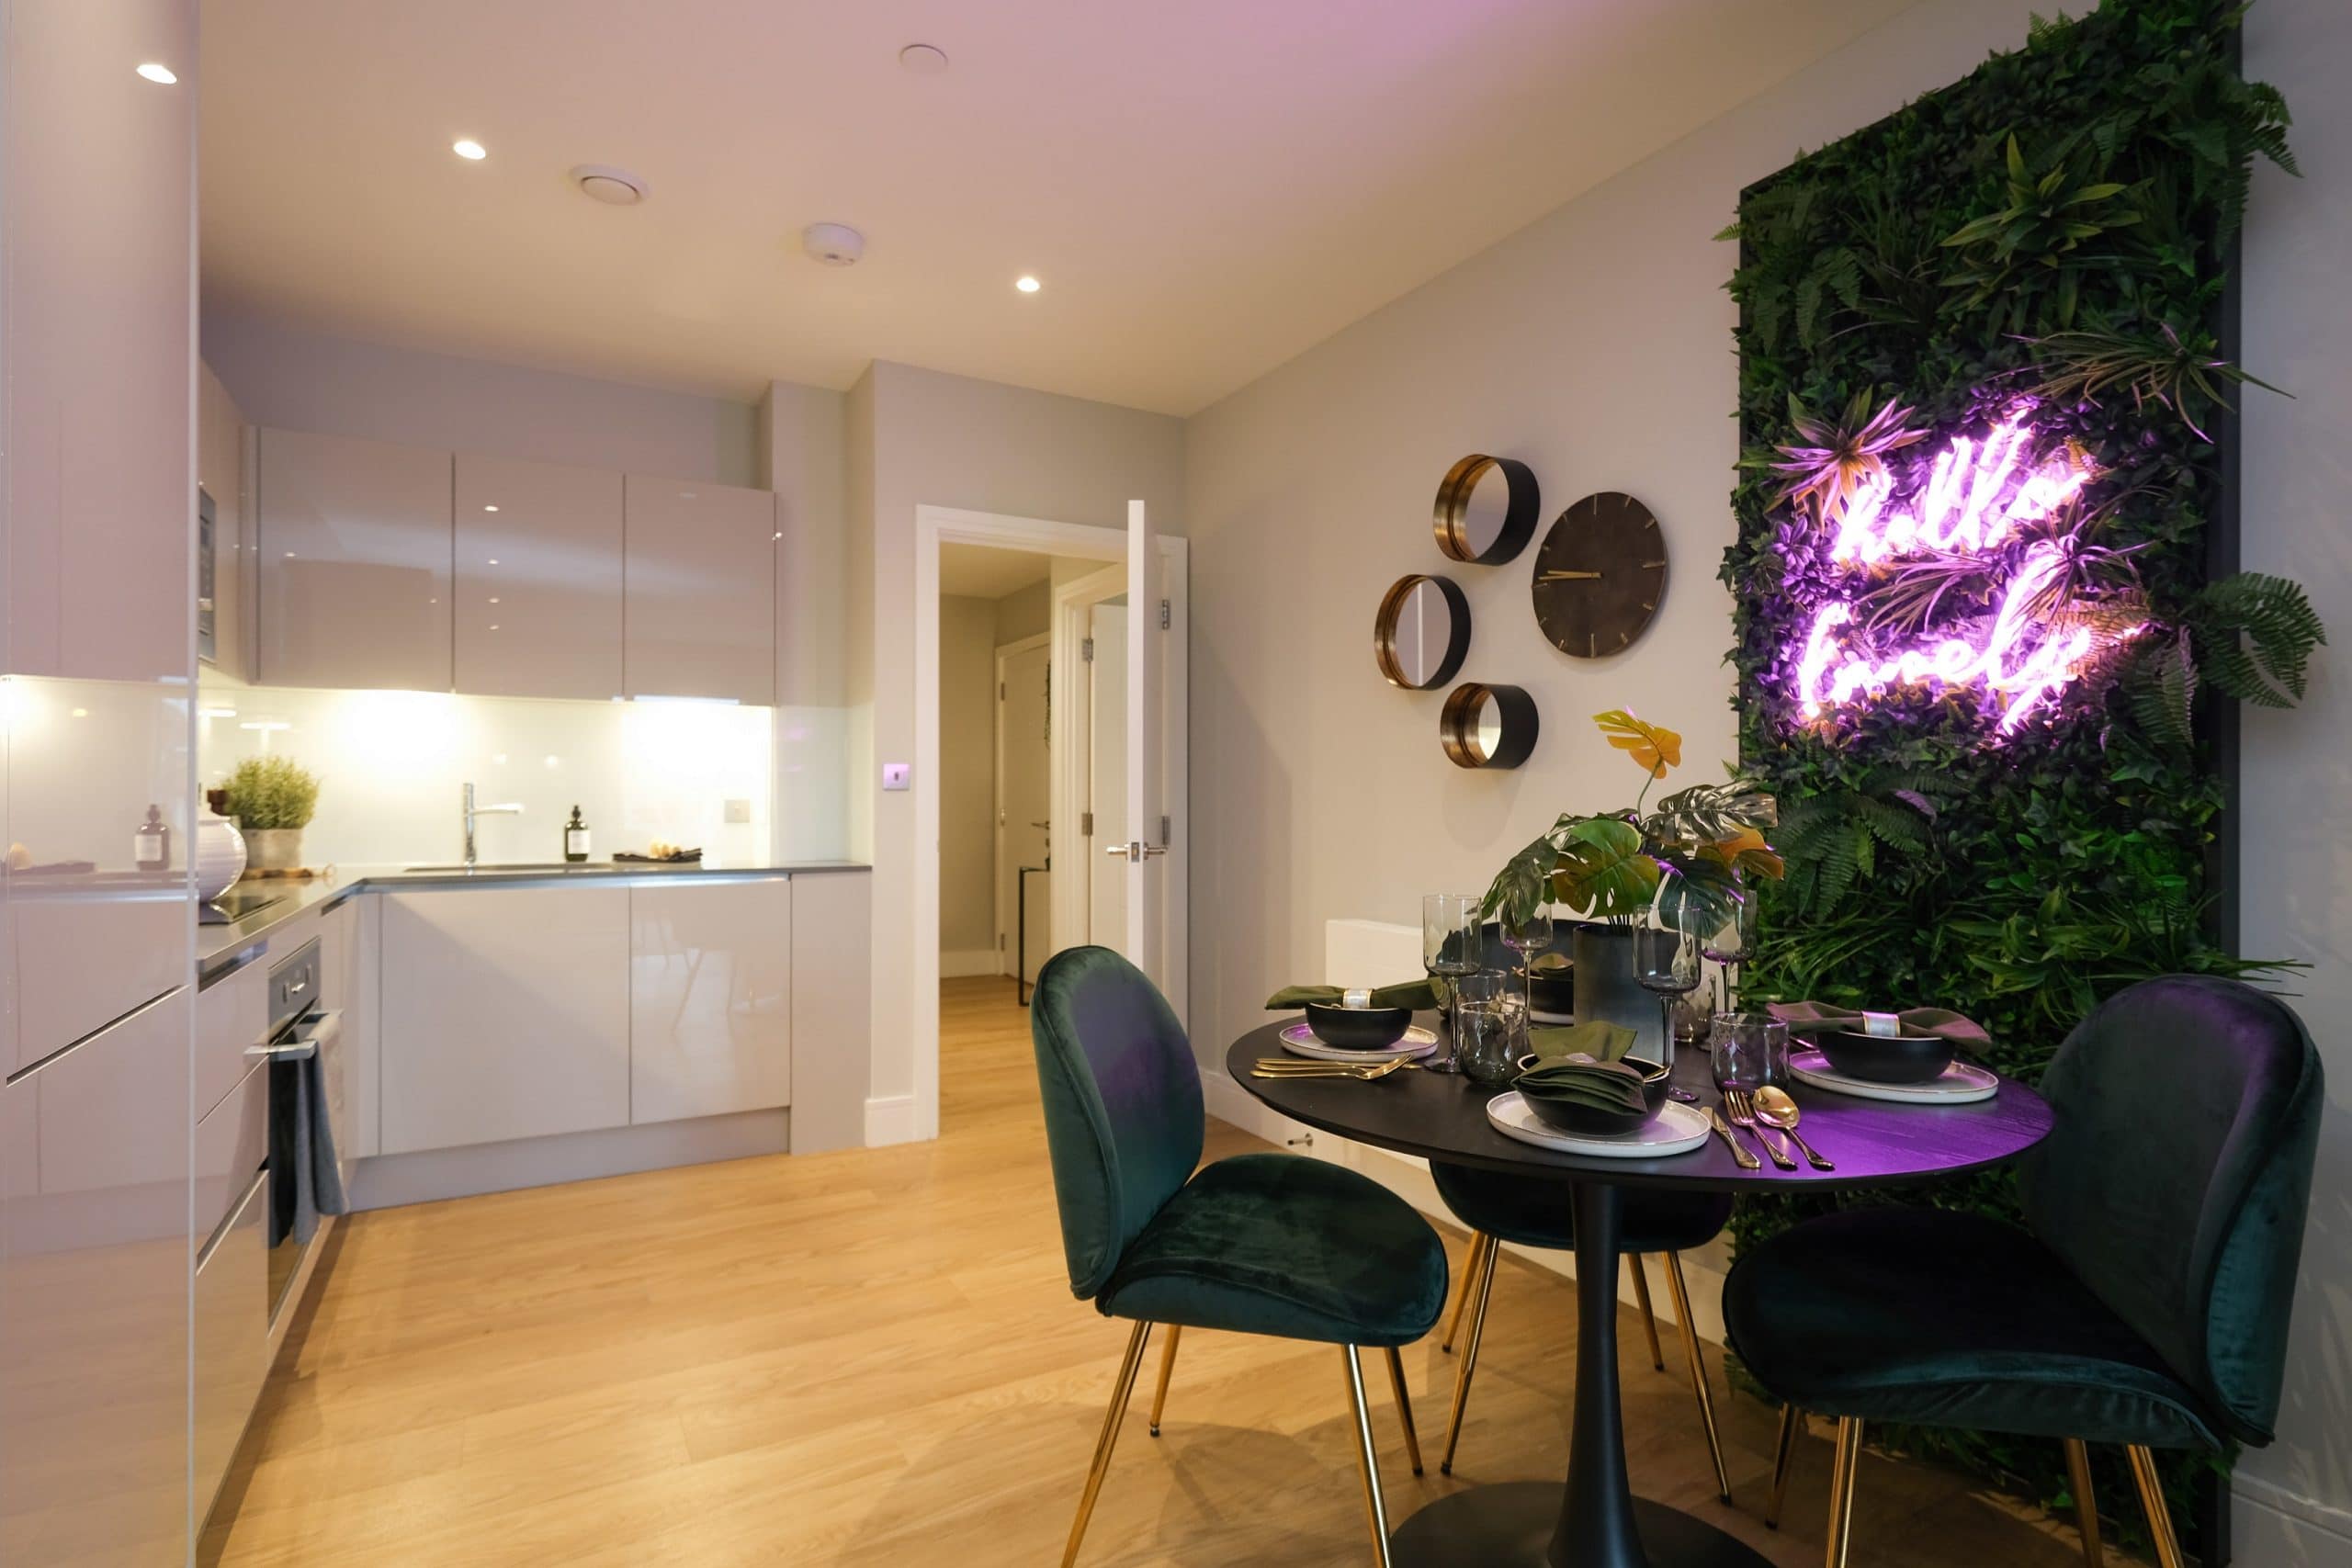 Kitchen area space at The Switch by Catalyst New Homes - Shared Ownership homes available on Share to Buy